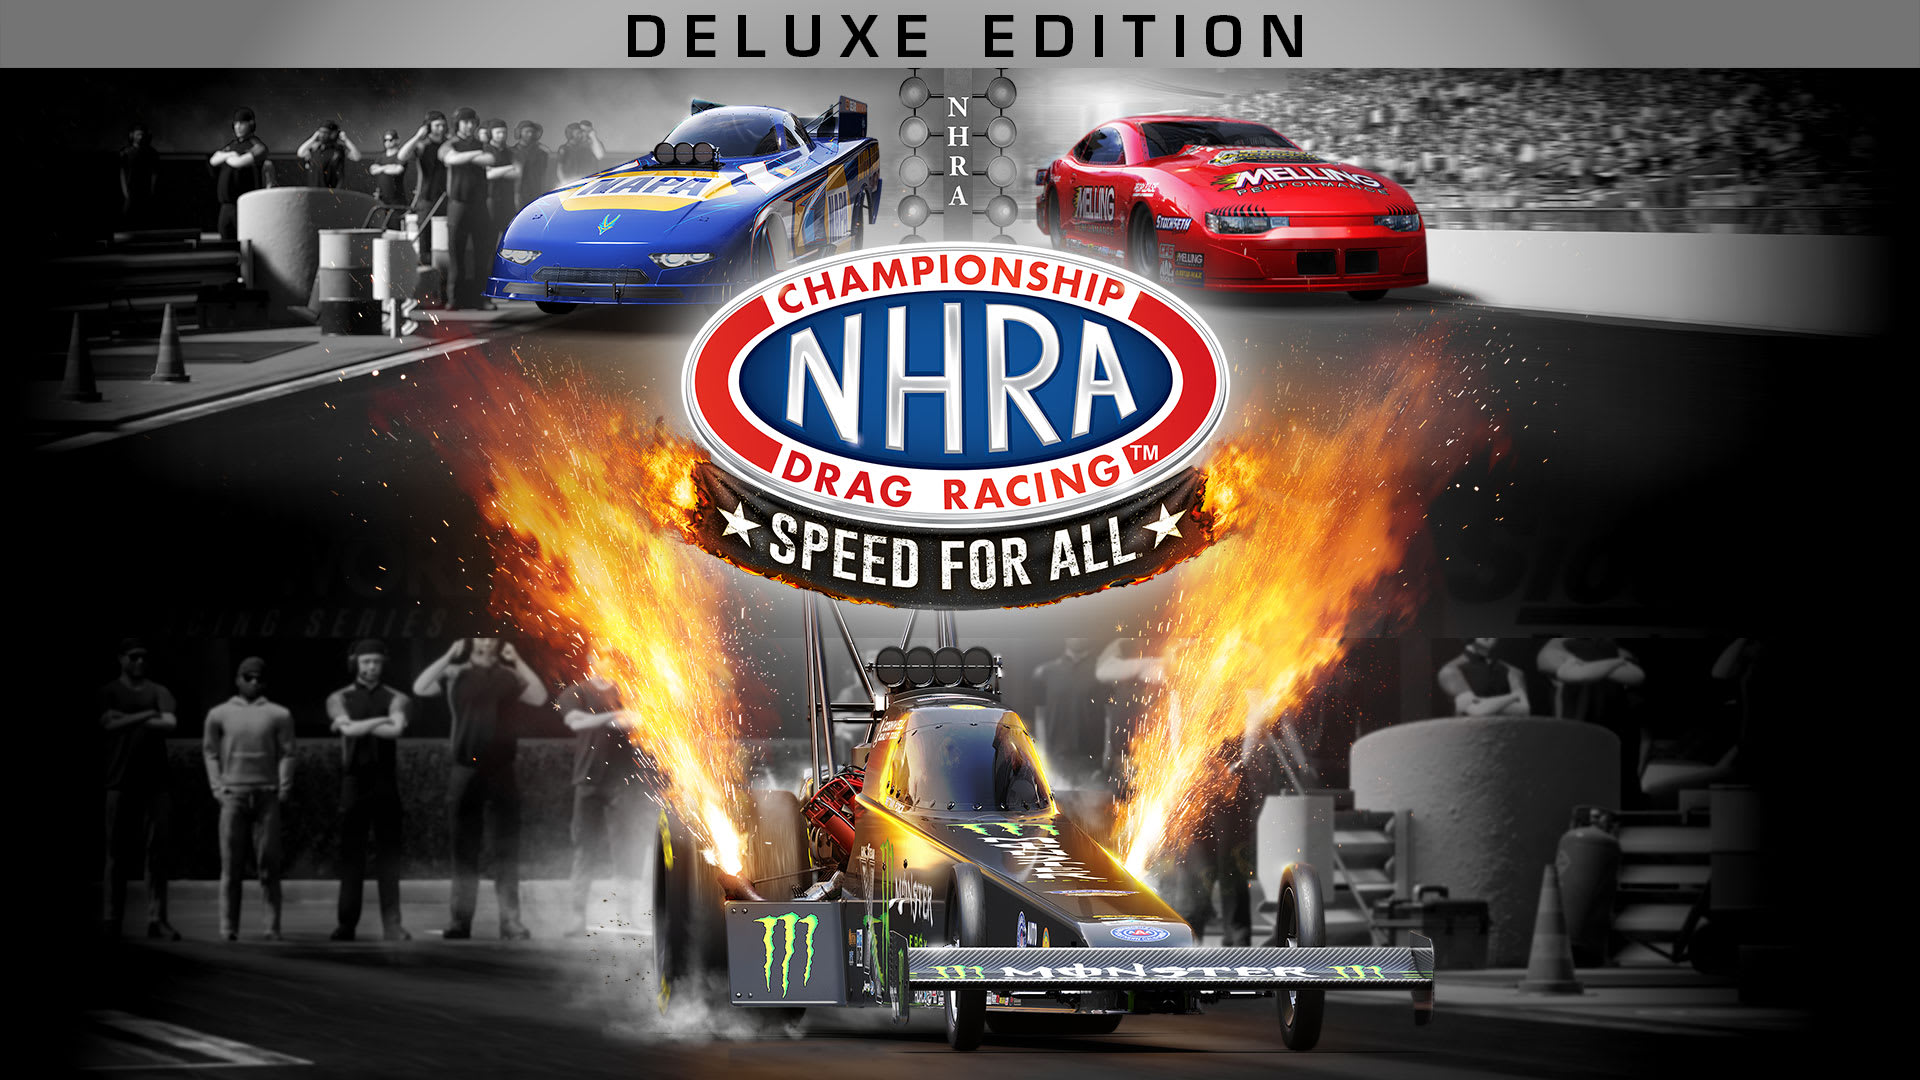 NHRA Championship Drag Racing: Speed for All - Deluxe Edition 1